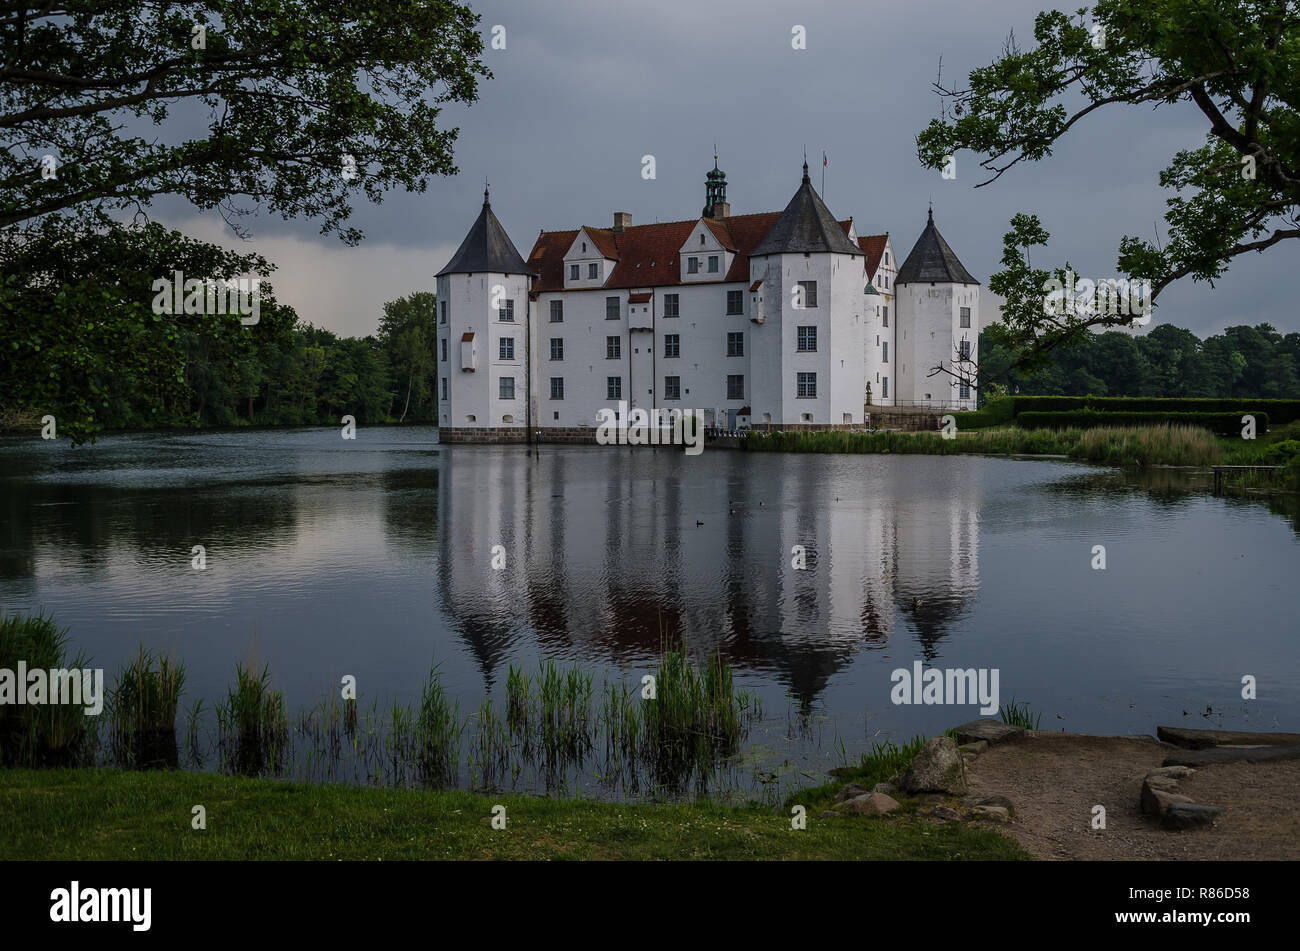 Glücksburg Castle is a water castle in the town of Glücksburg, Germany. It is one of the most important Renaissance castles in northern Europe. Stock Photo